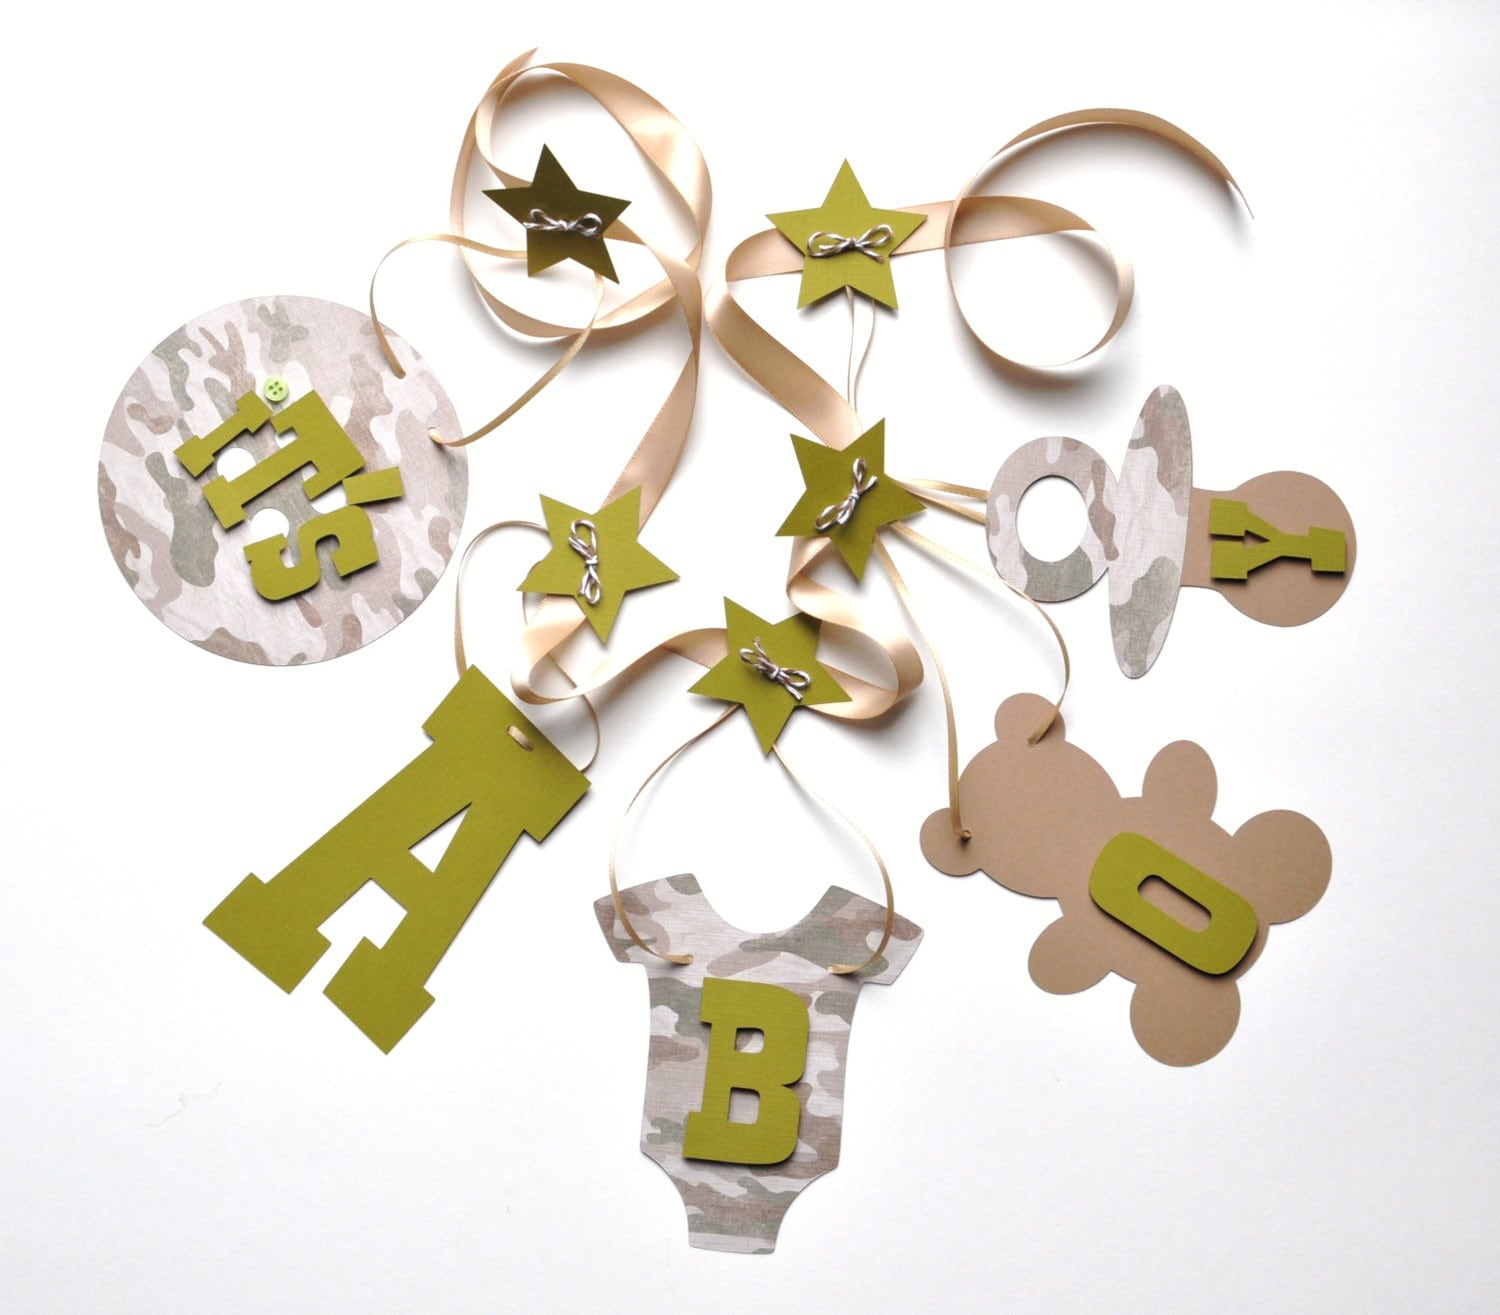 Popular items for camo baby shower on Etsy